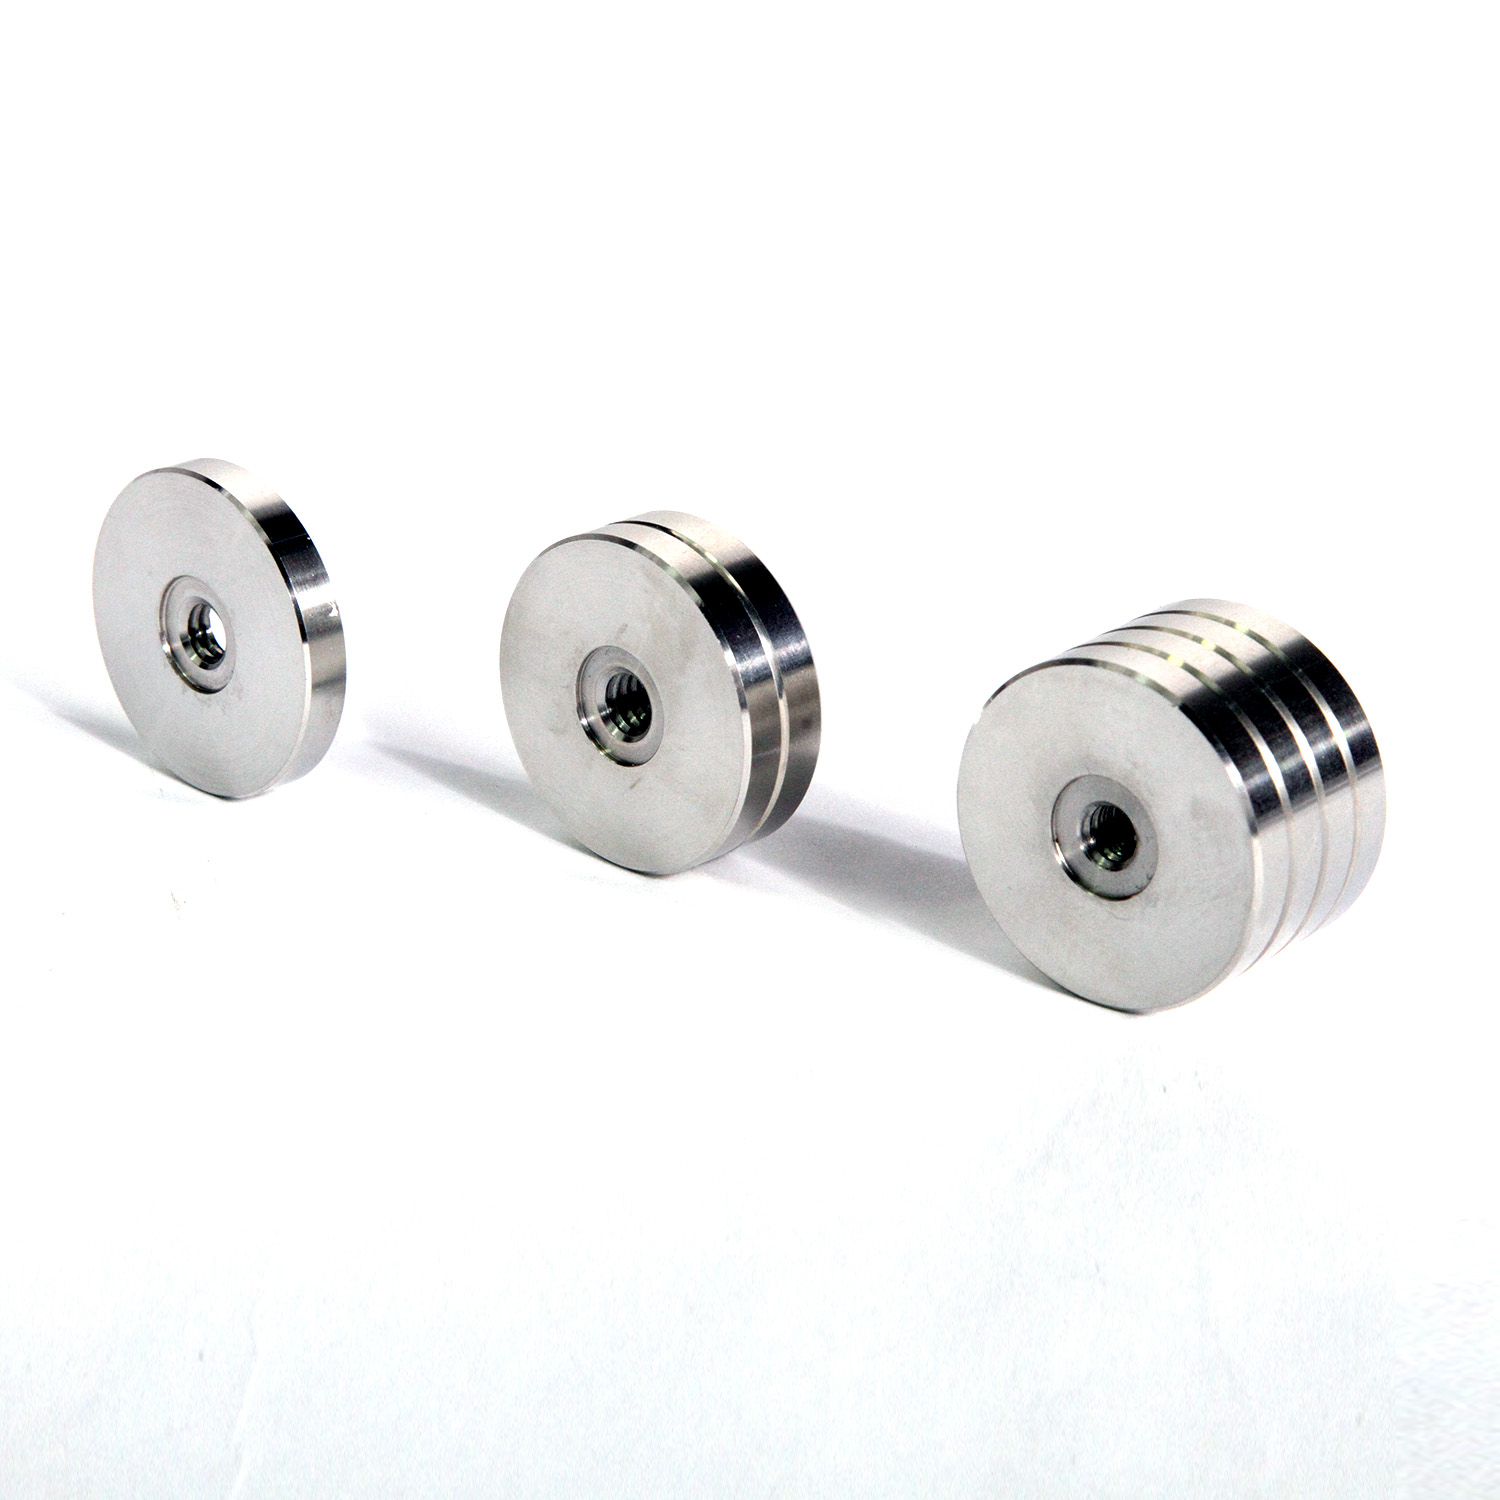 Stainless Steel Archery Stabilizer Mount Screw for Compound Recurve Bow